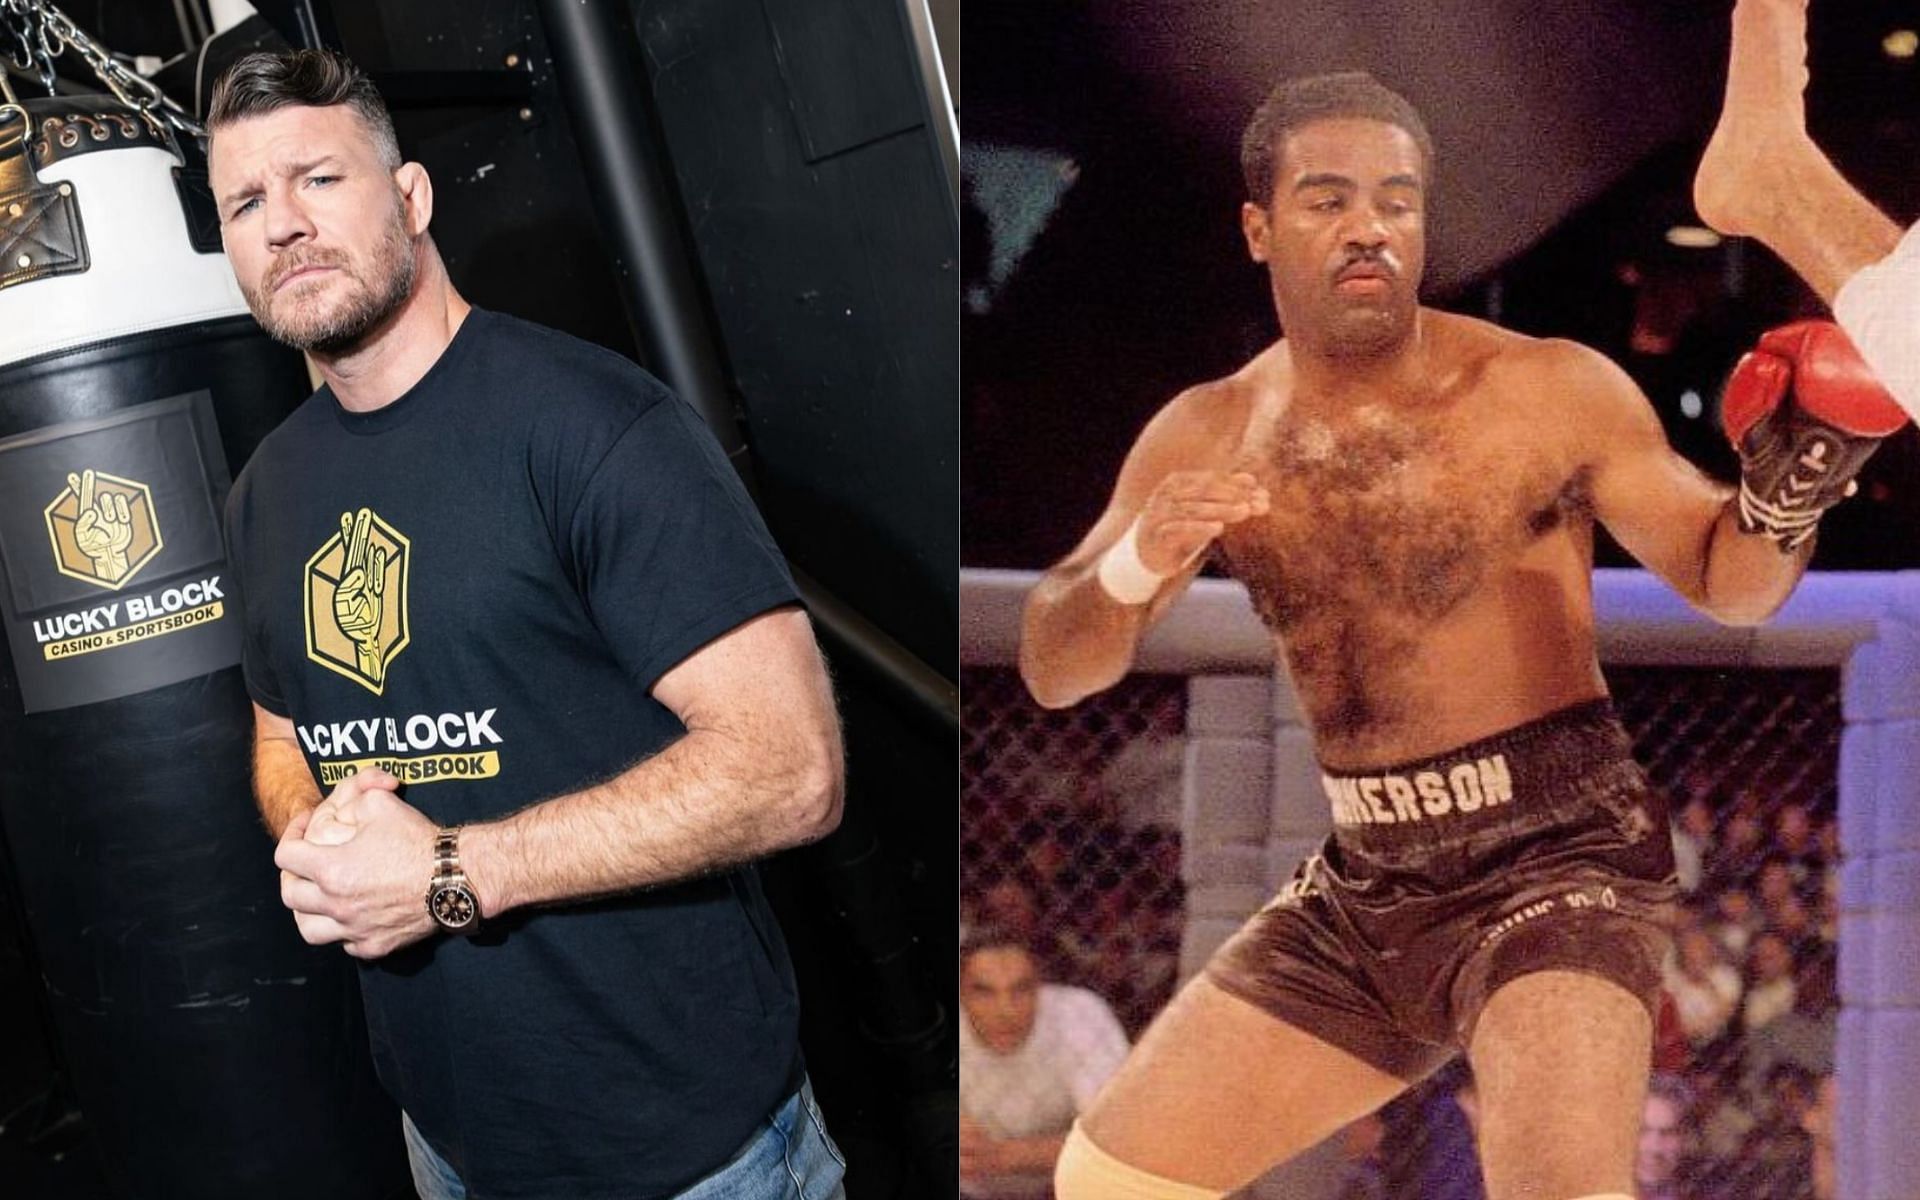 Michael Bisping (left) paid tribute to Art Jimmerson (right) at UFC St. Louis [Photo Courtesy @mikebisping on Instagram and Getty Images]